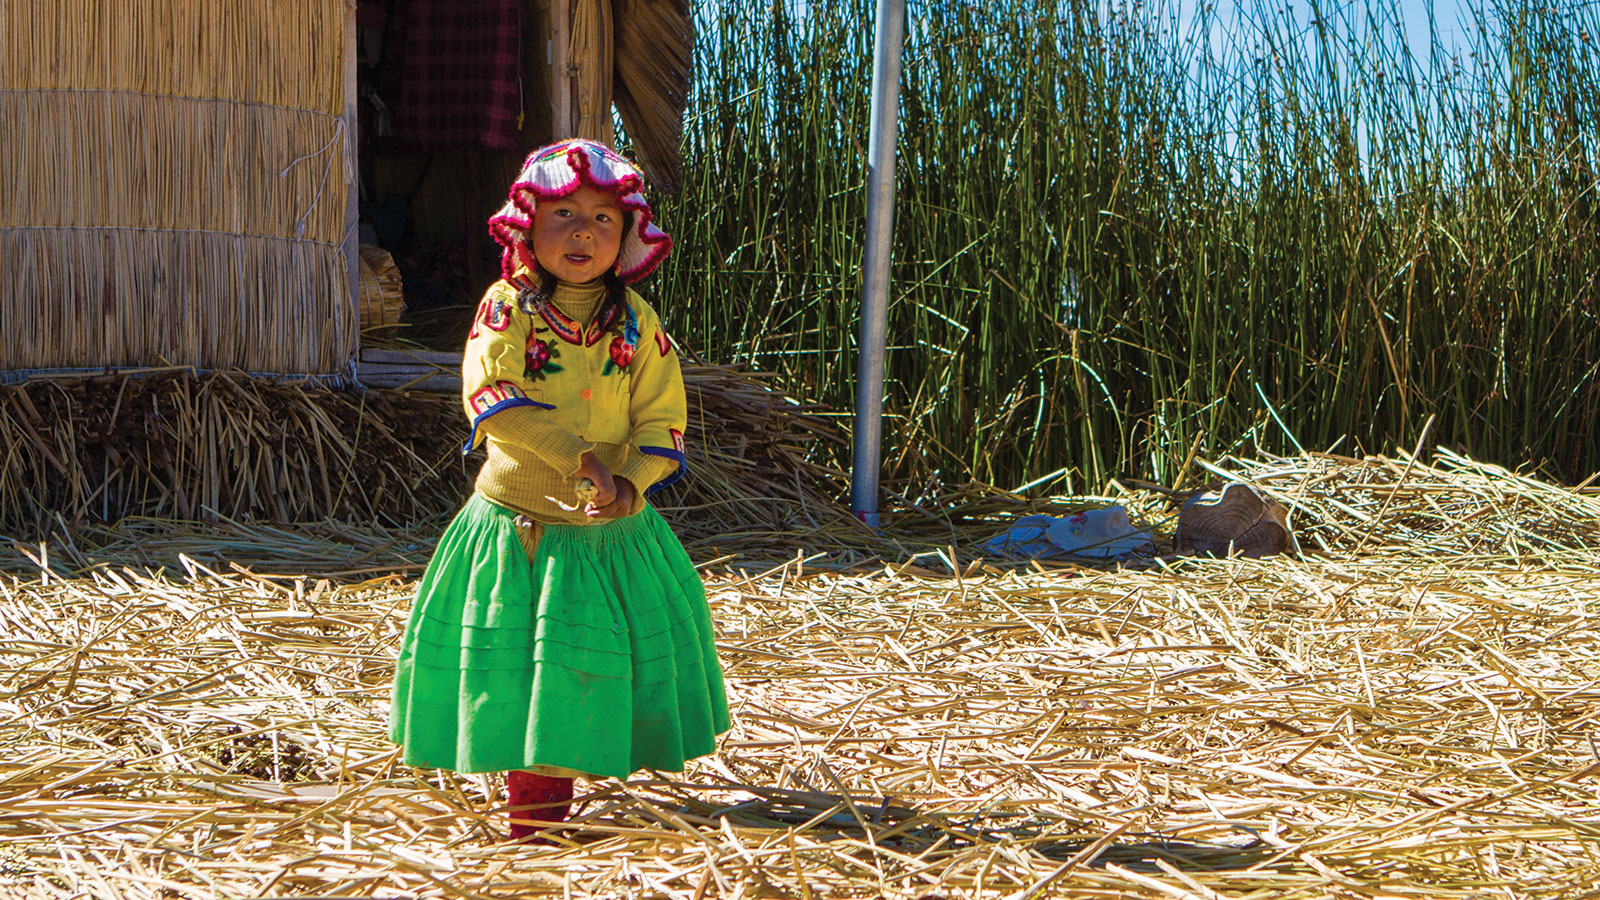 A young Uru girl in traditional clothing walks on a reed island in Isla de los Uros on Lake Titicaca with kids